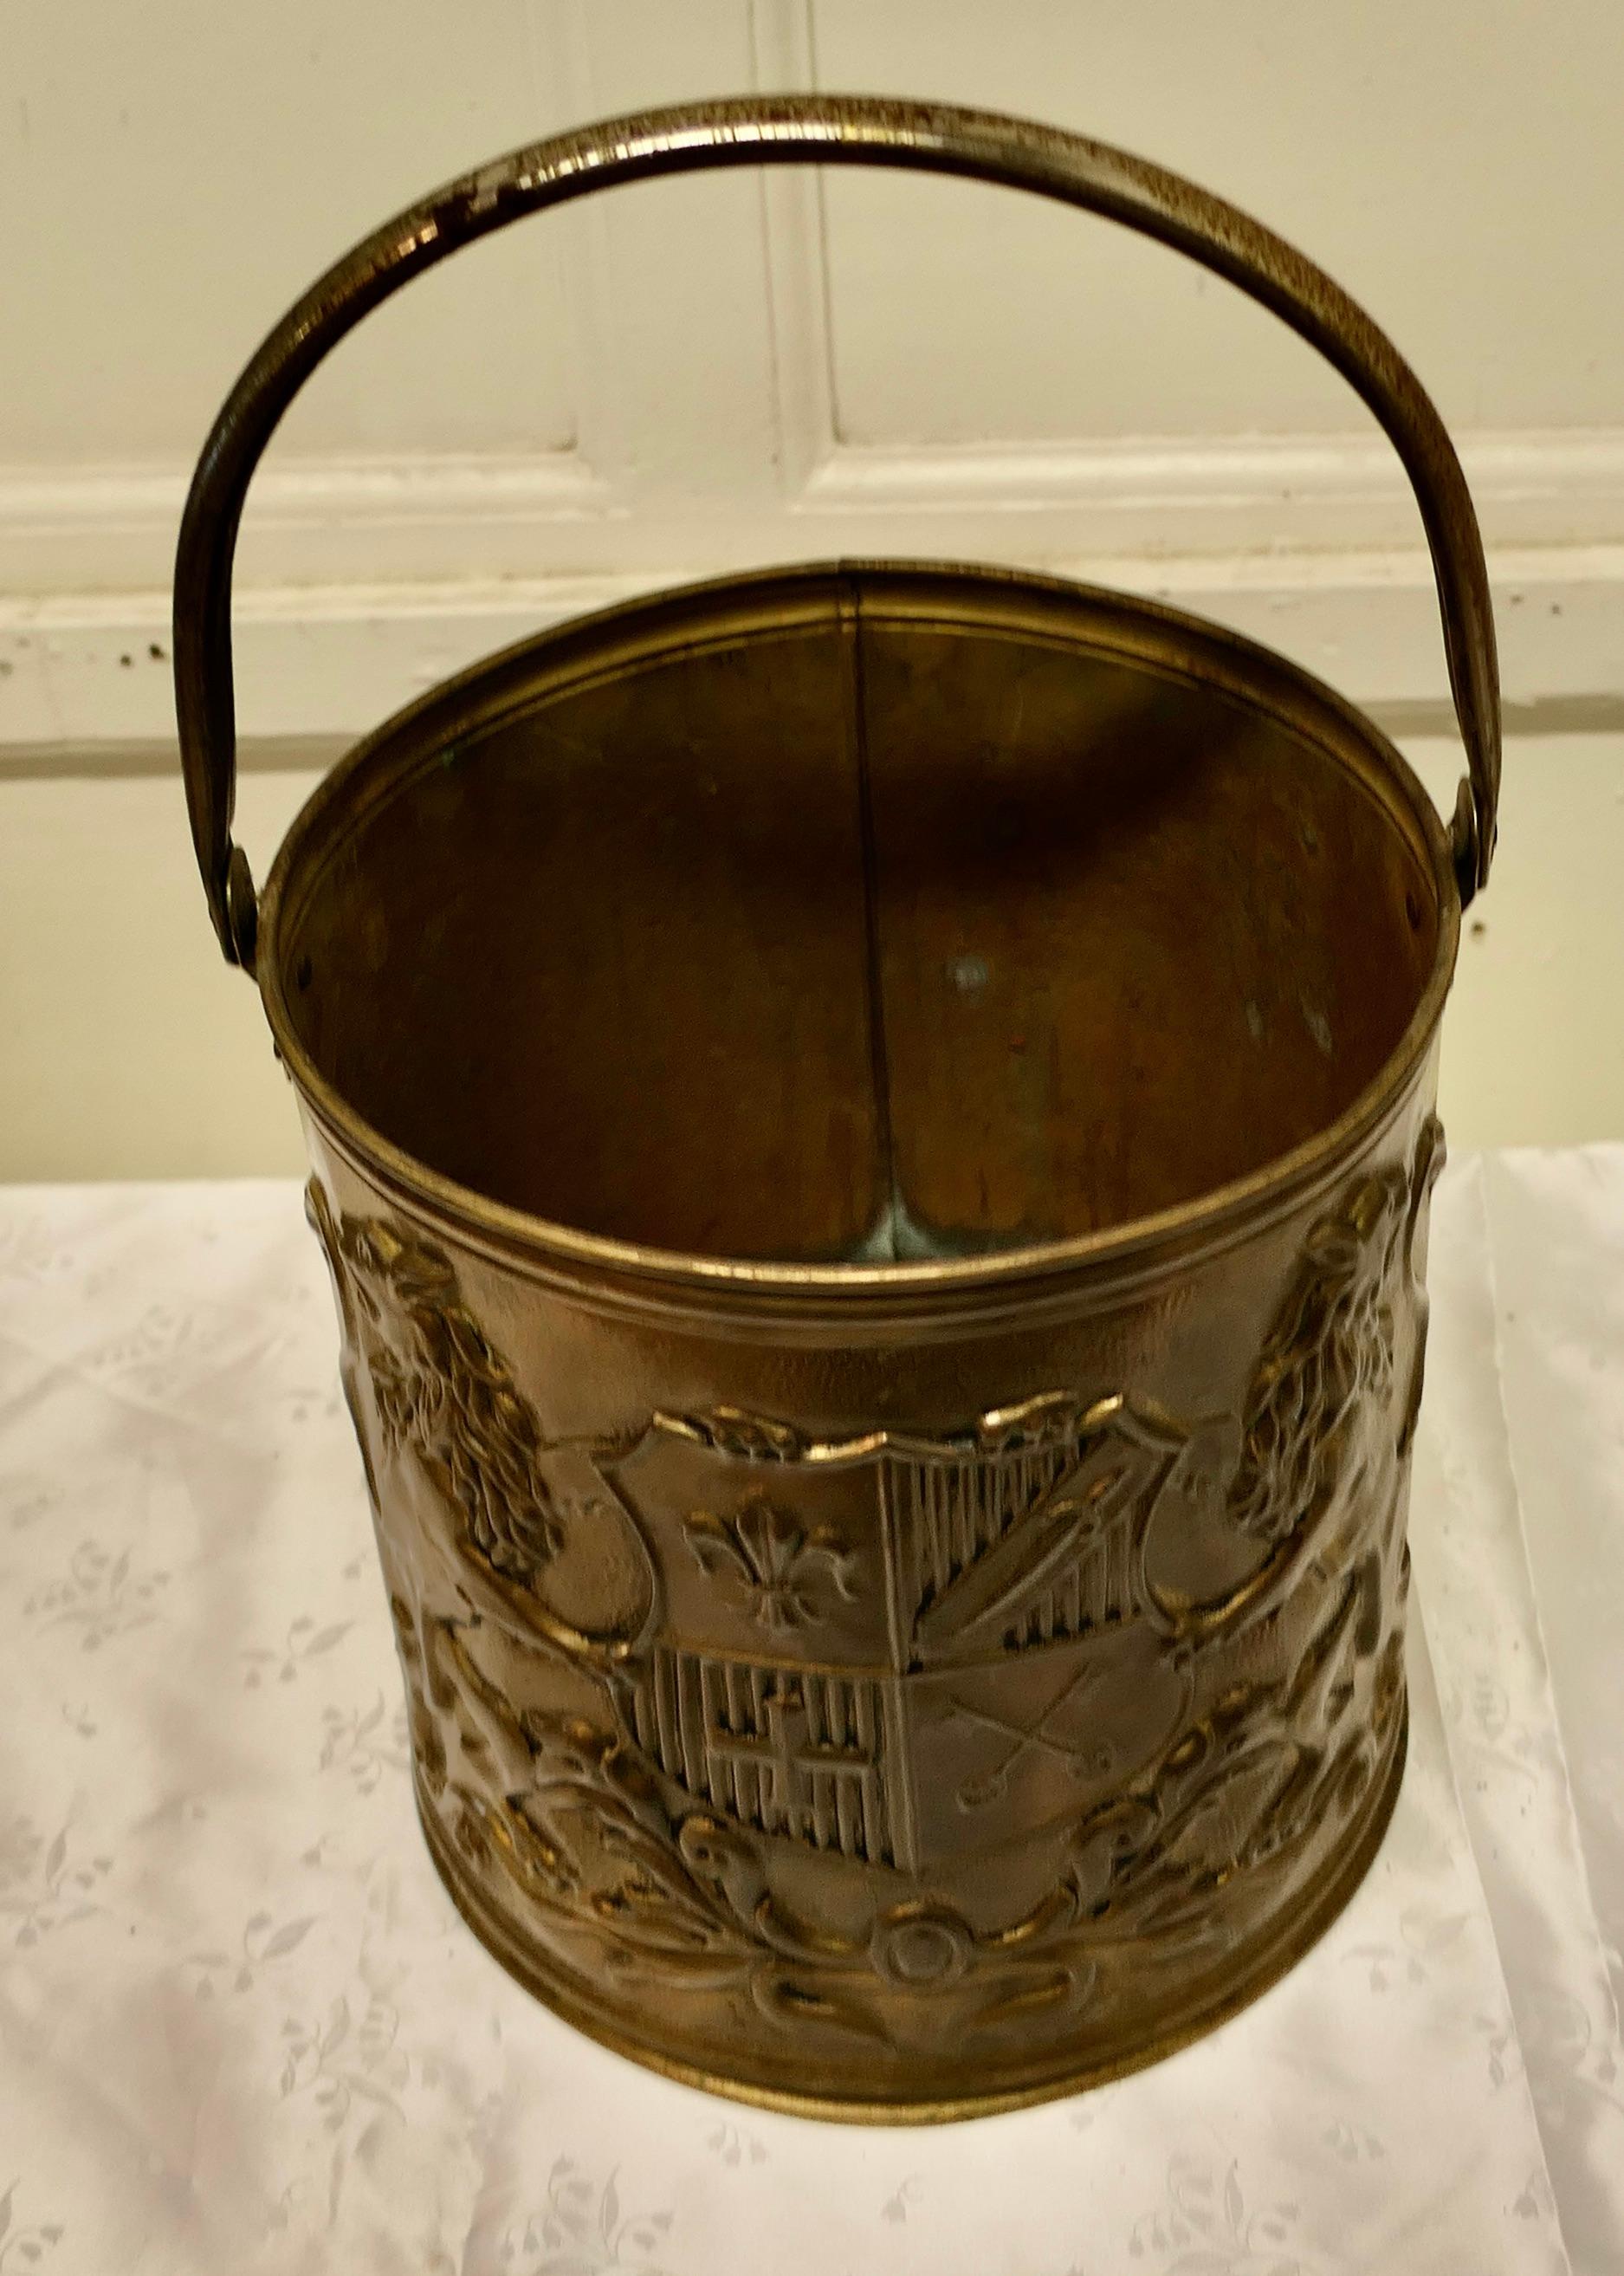 Arts and Crafts Embossed brass coal bucket

This good looking piece it is round in shape with a Royal Crest embossed on the front. The heraldic crest is supported by a Rampant Lion on each side, it has hooped carrying handle and would grass any